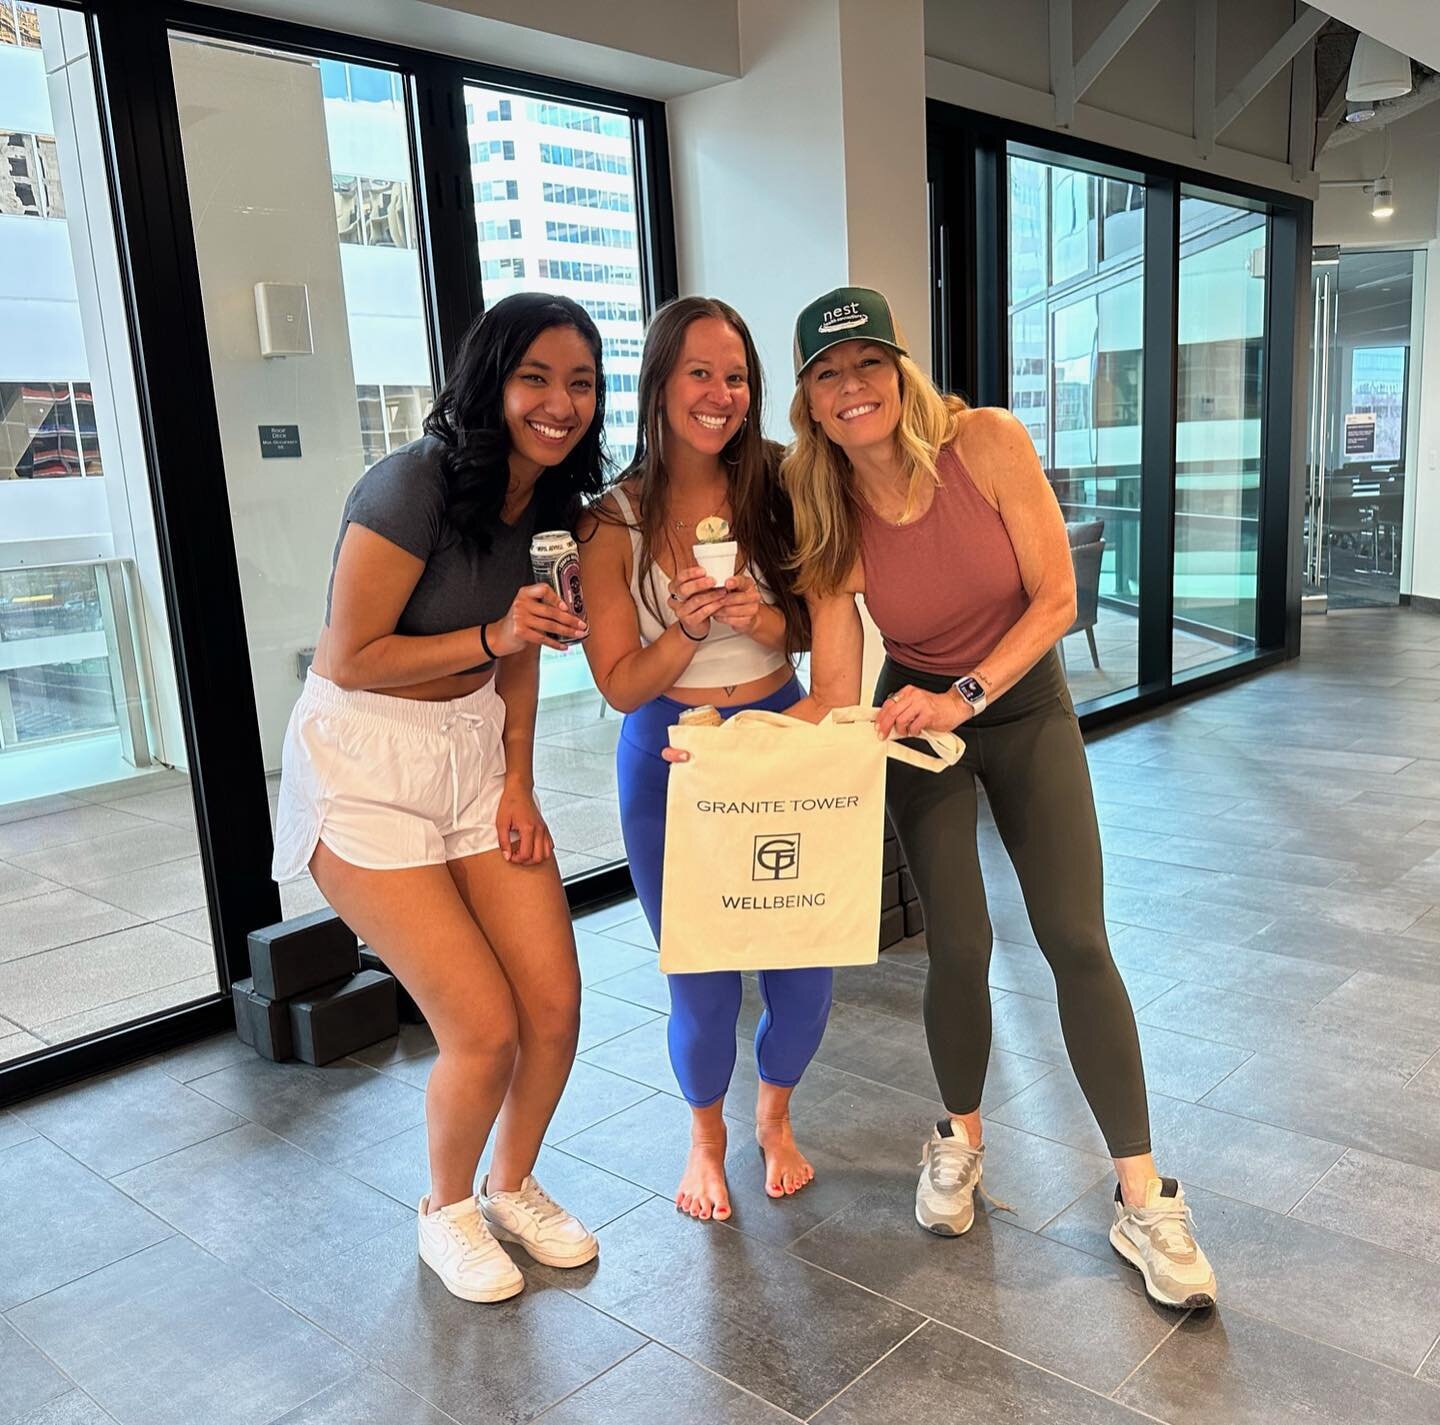 A belated Earth Day post in celebration of the incredible planet we call home🌍 and this fun partnership with @drinkhoochbooch at Granite Tower in downtown Denver!

Last week, we hosted a Kombucha Earth Day Happy Hour with yoga lead by @bridget.lavin